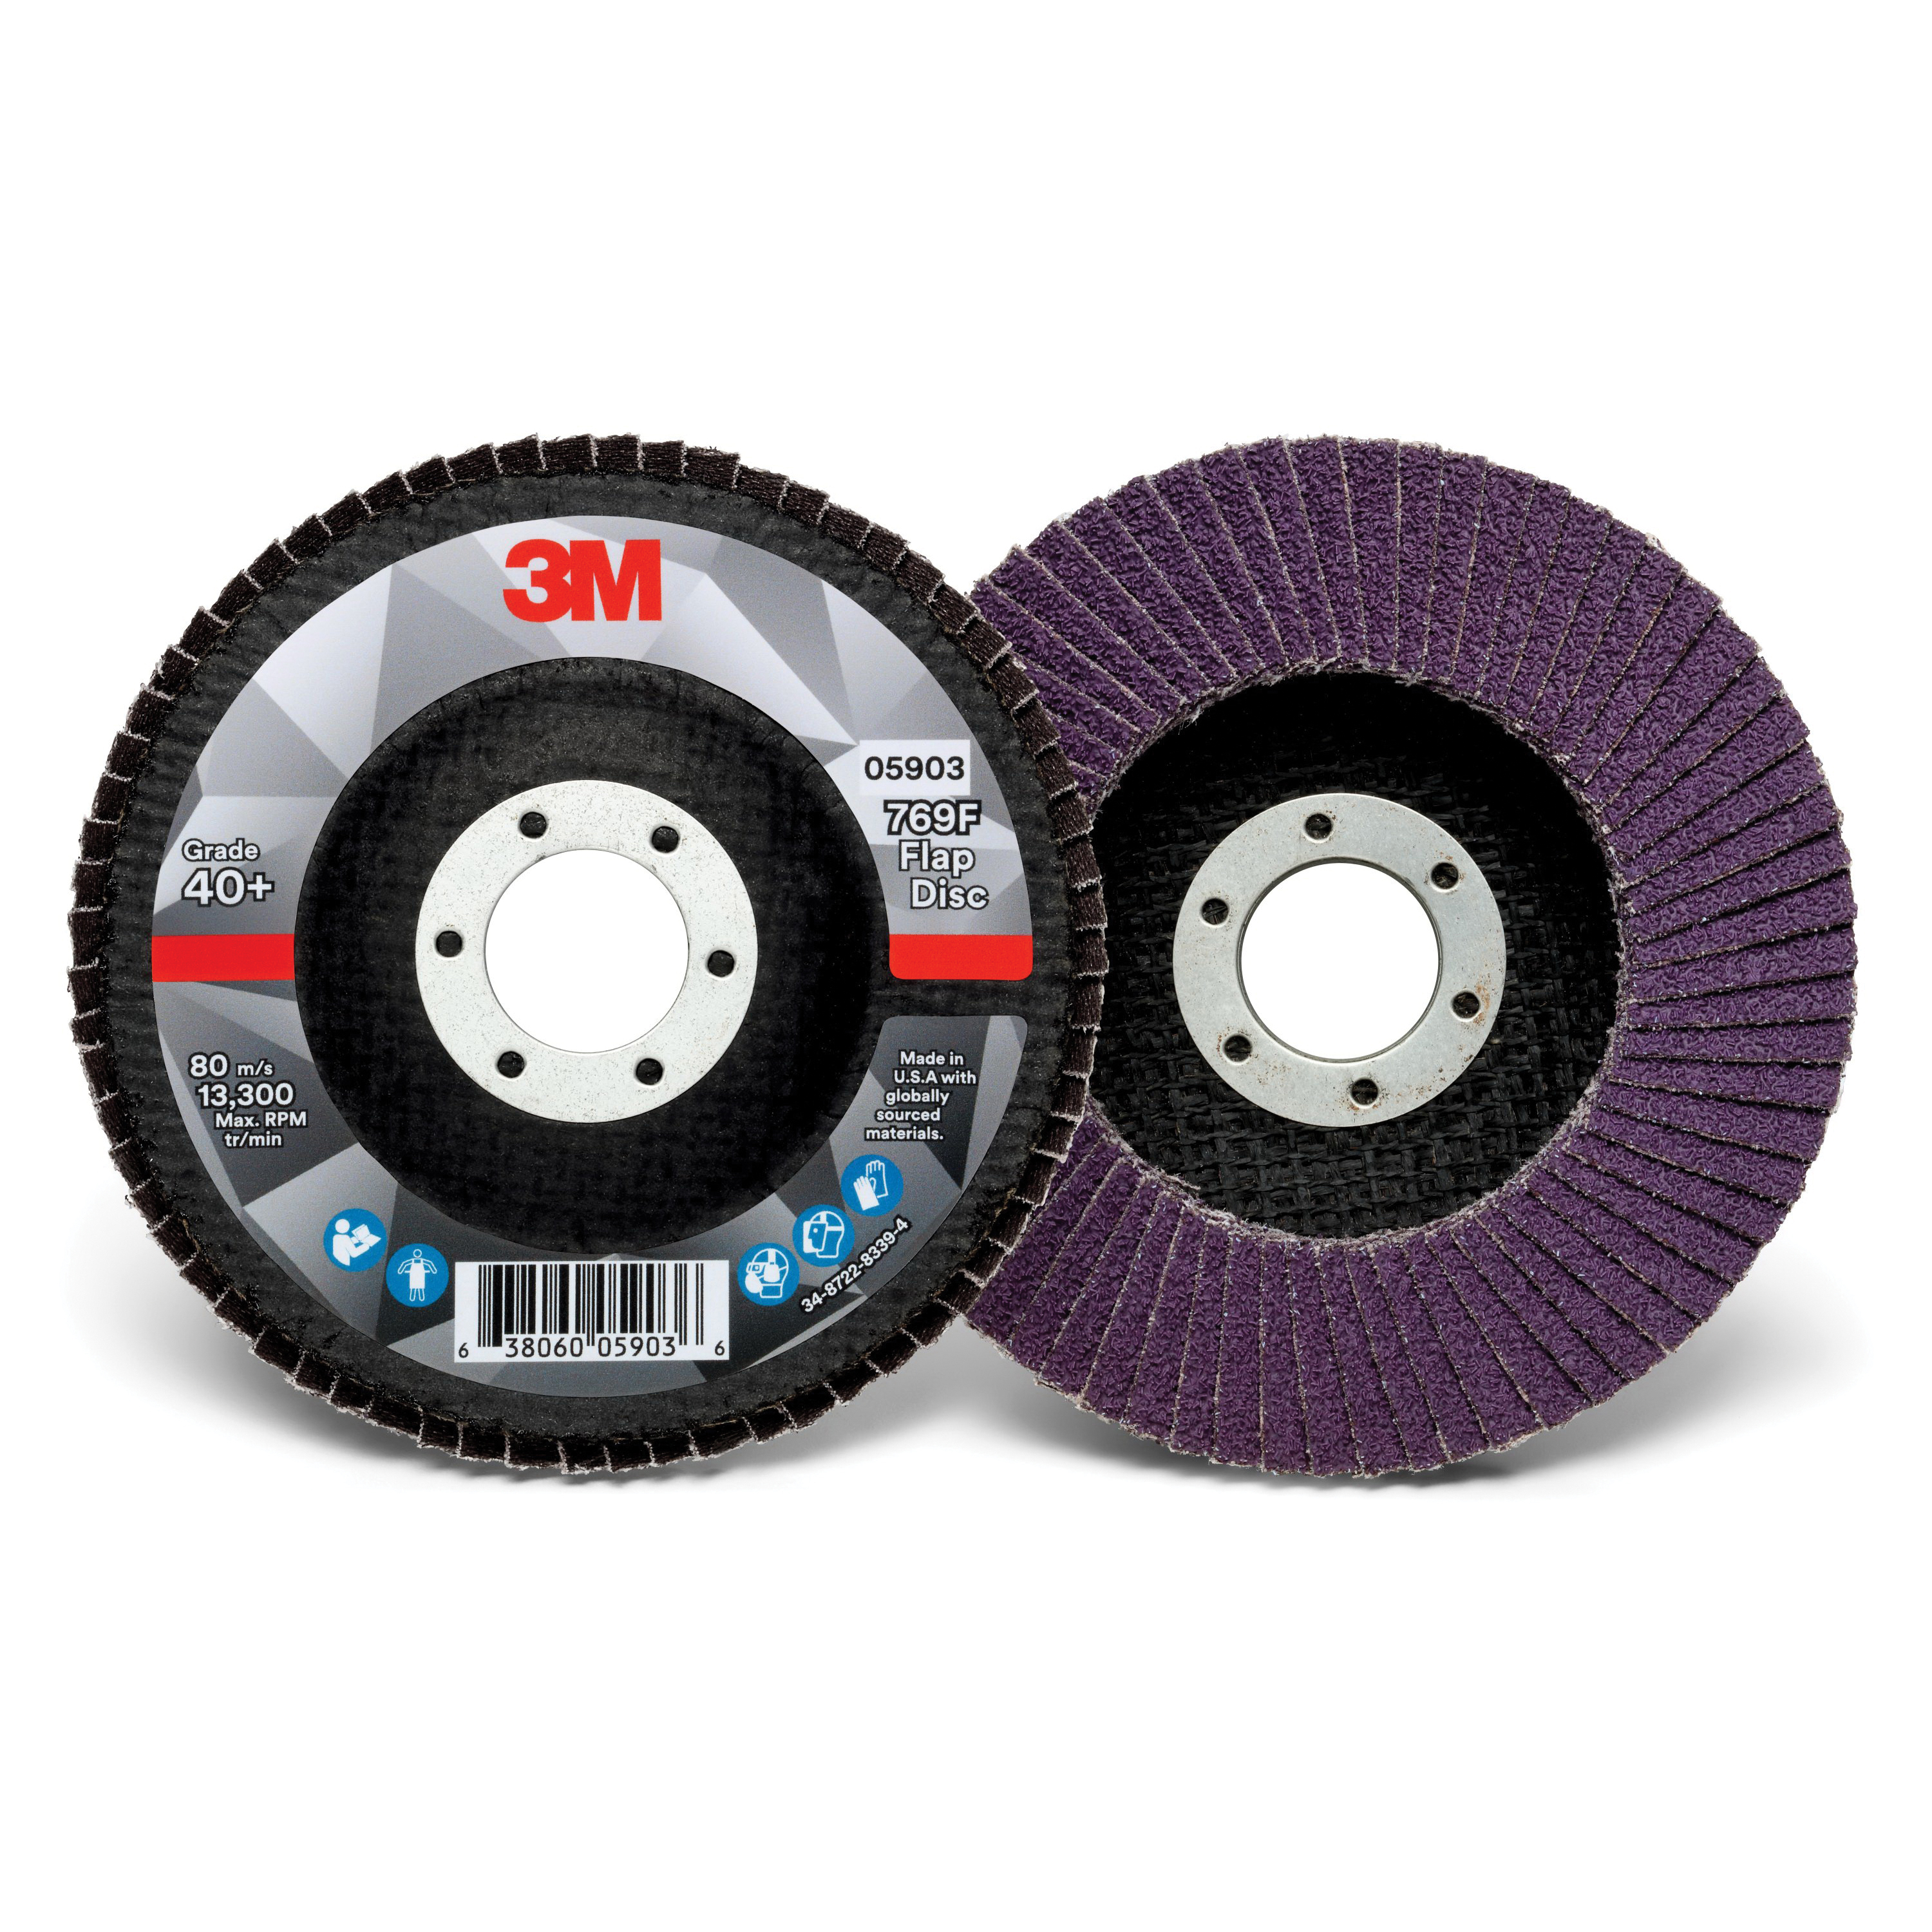 3M™ 038060-05903 Open Coated Abrasive Flap Disc, 4-1/2 in Dia, 7/8 in Center Hole, 40+ Grit, Precision Shaped Ceramic Abrasive, Type 27 Disc